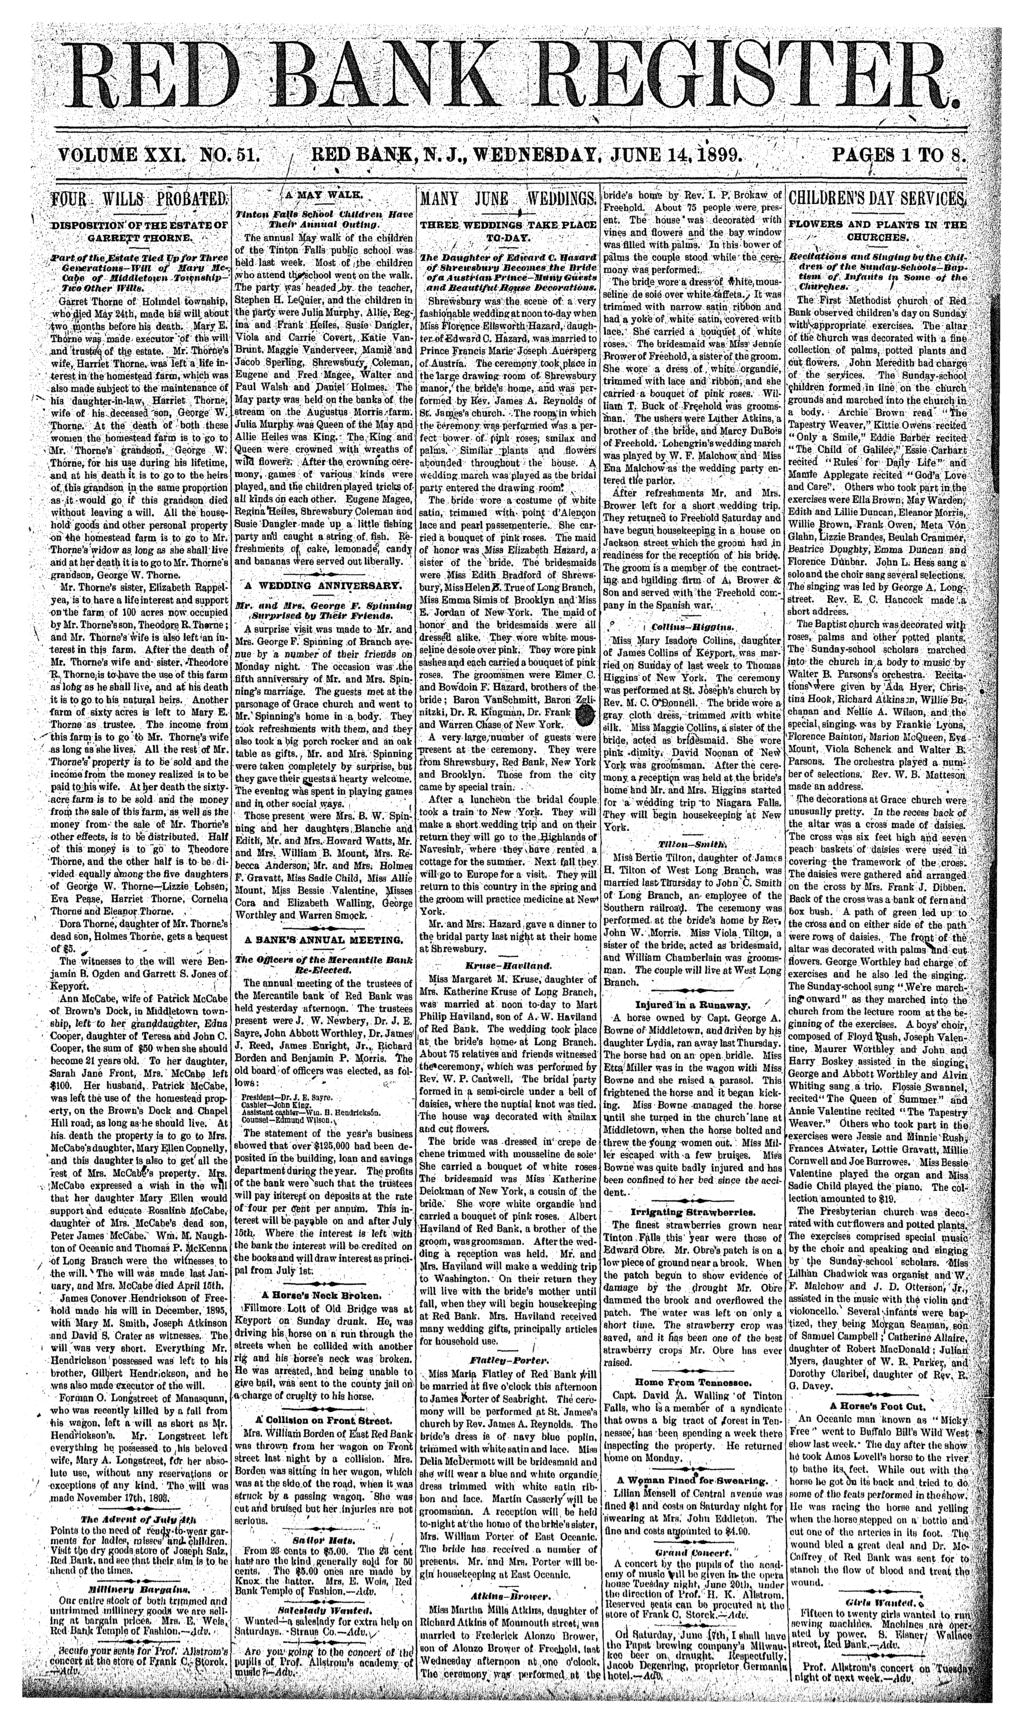 1 / VOLUME XXL NO. 51. / REDBAN,N.J., WEDNESDAY, JUNE 14,1899.. PAGES 1 TO 8.. - / <», - ; _ / _ : / OUR. WLLS PROBATED; > " * DSPOSTON OF THE ESTATE or 1 GARRETT THORNE.